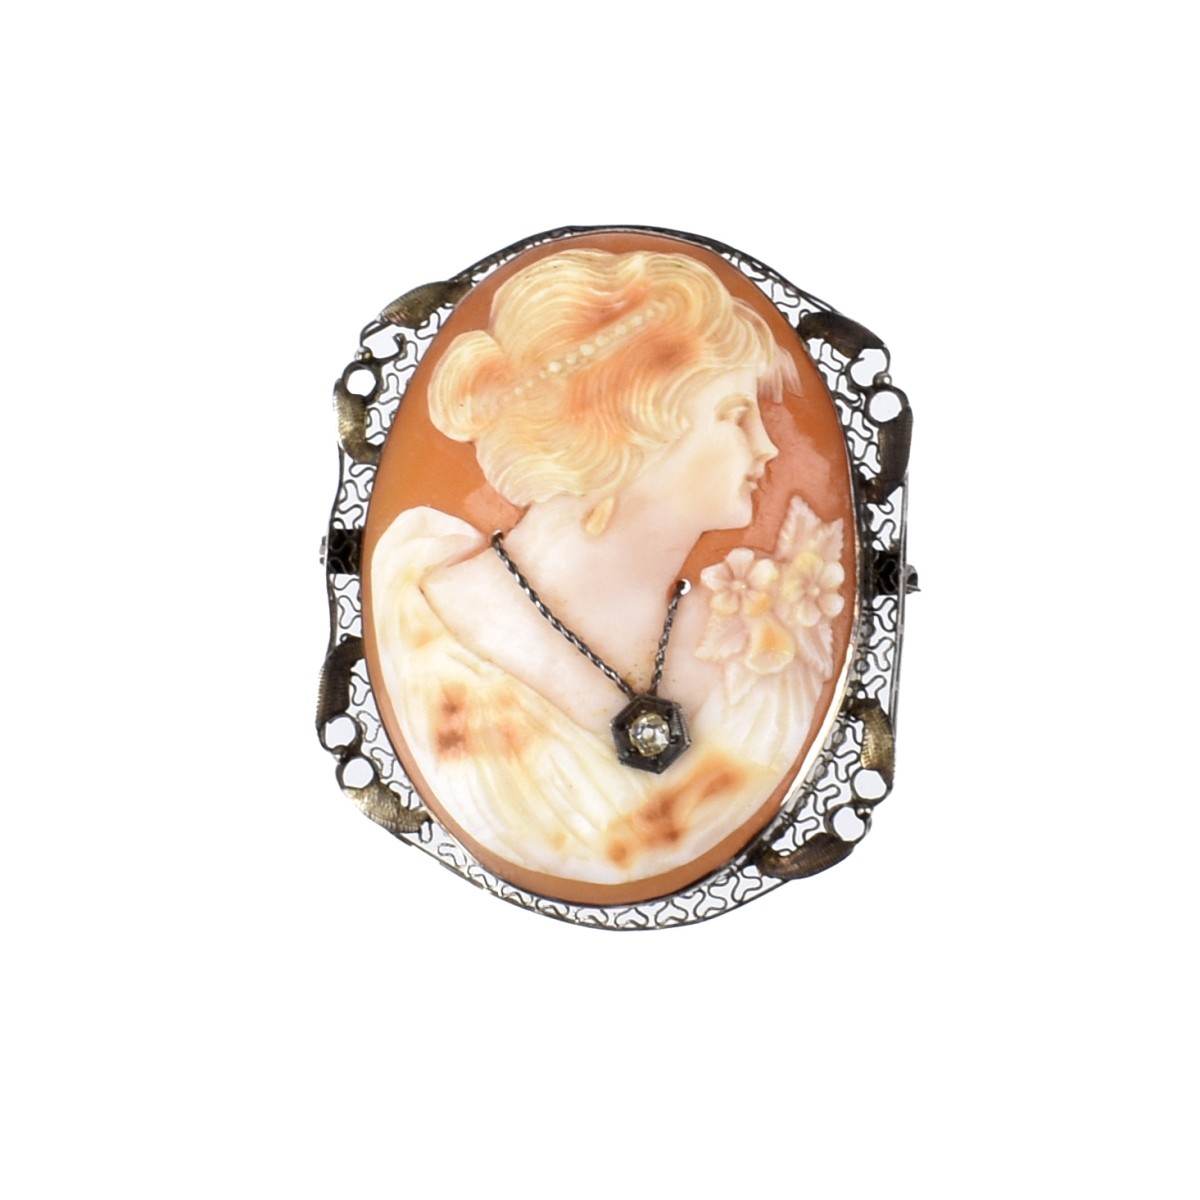 14K and Carved Shell Cameo Pendant / Brooch